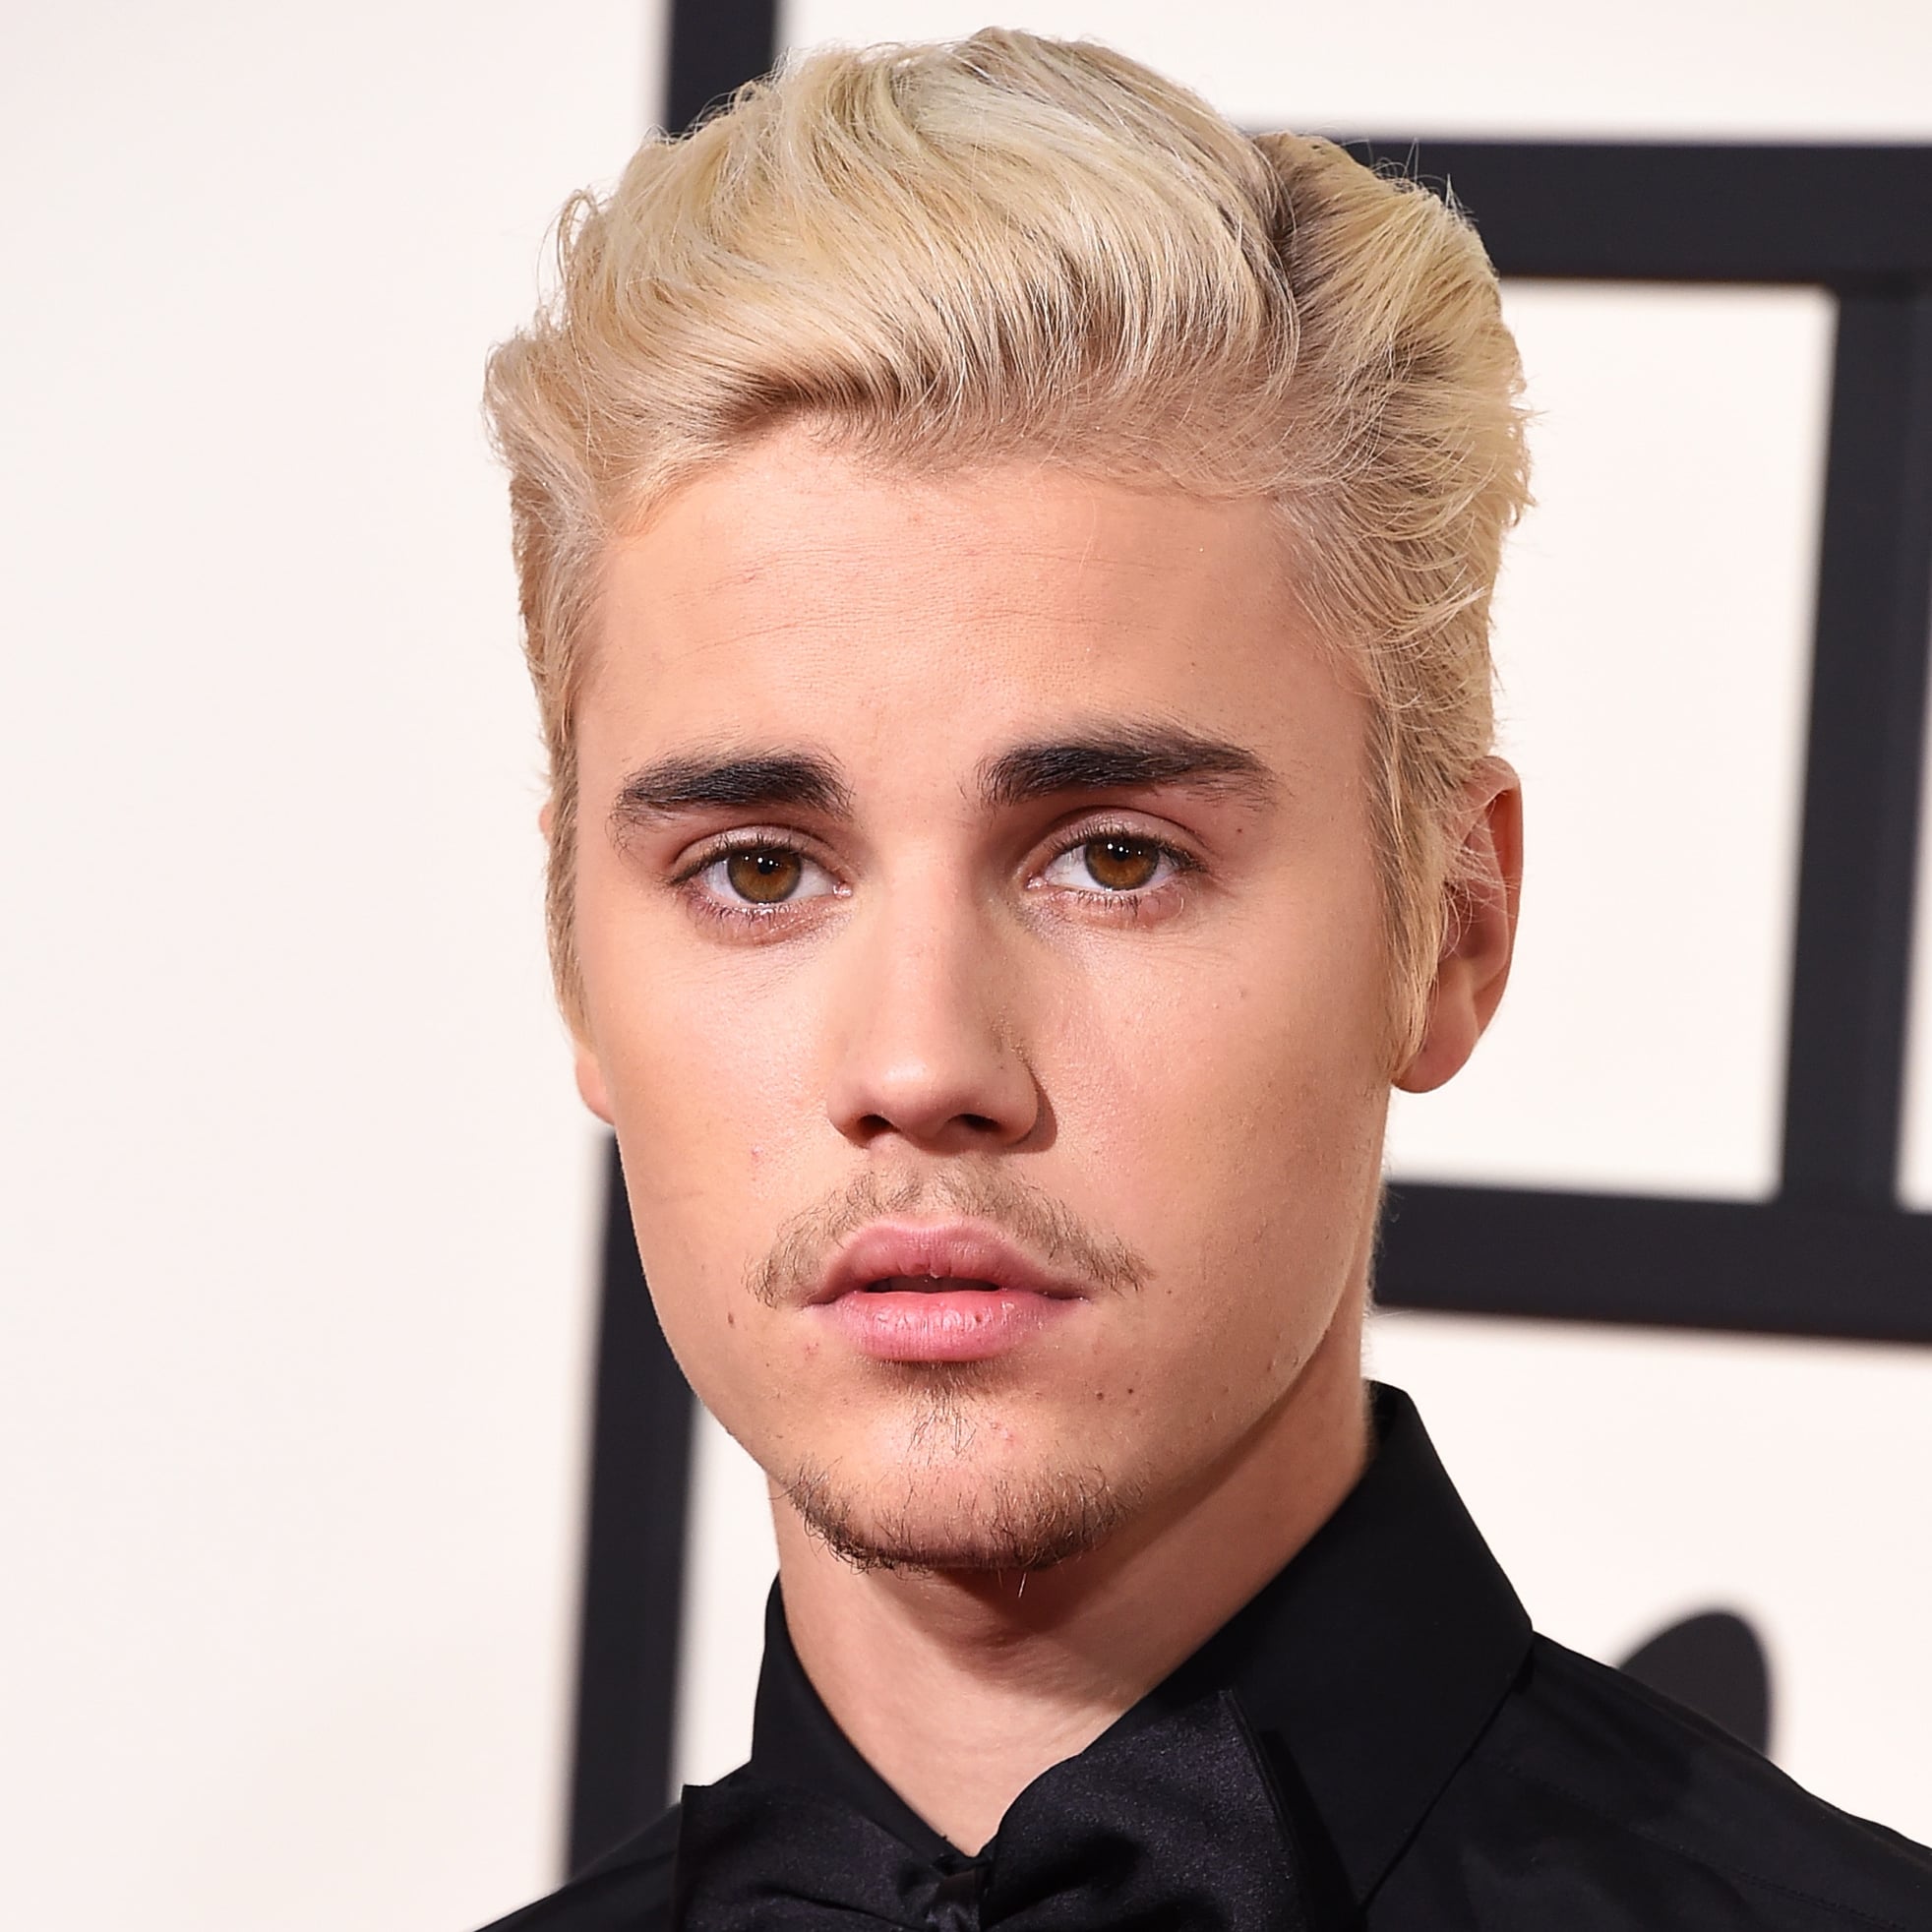 5 facts about Justin Bieber